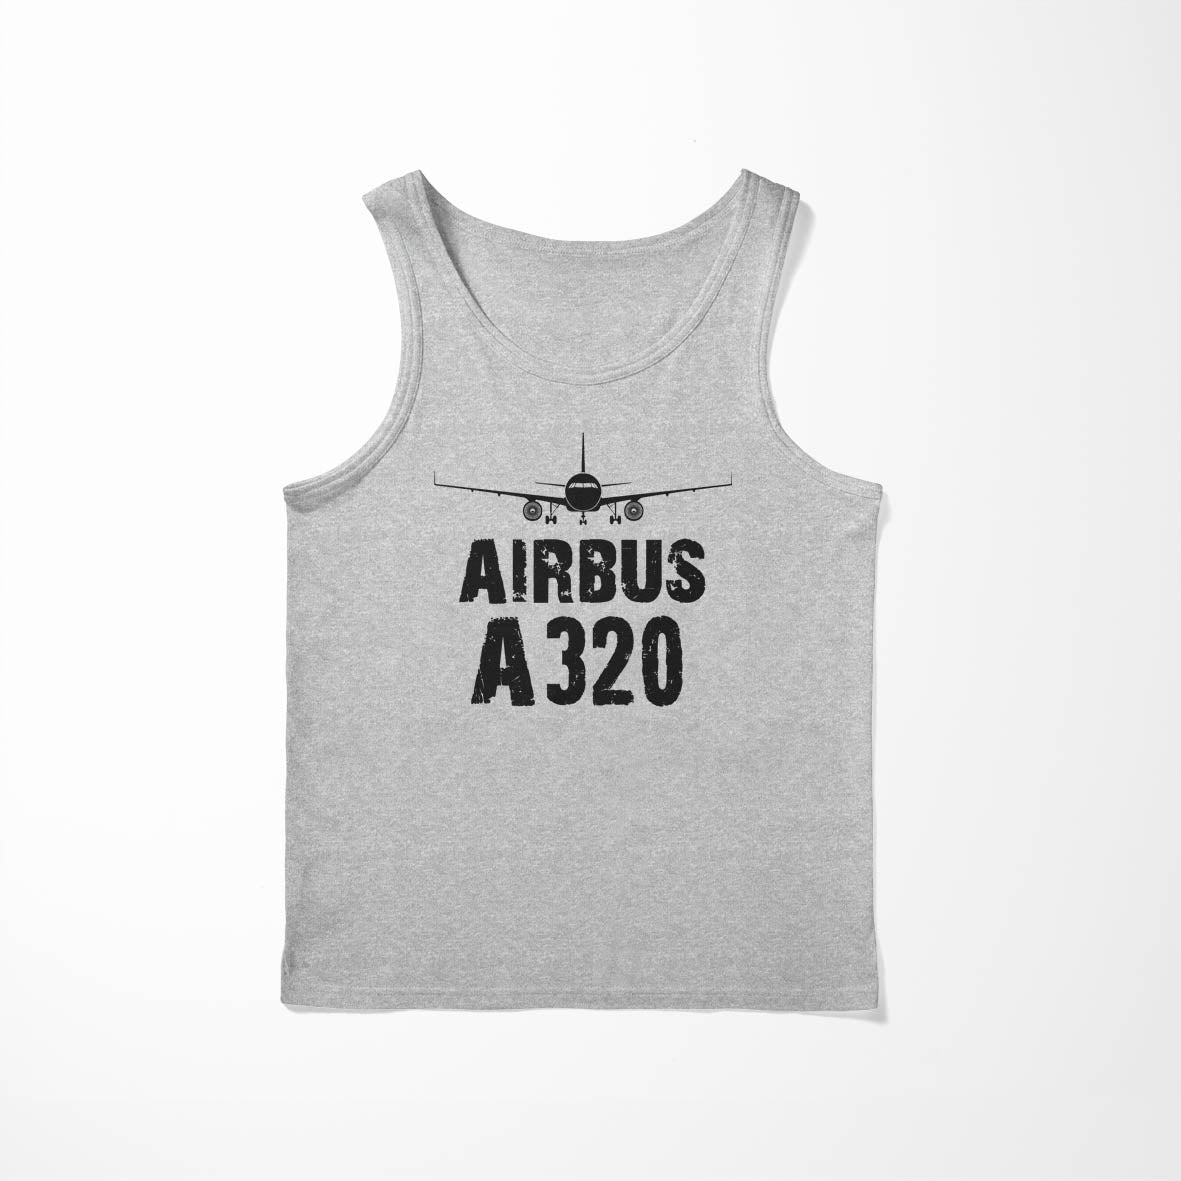 Airbus A320 & Plane Designed Tank Tops